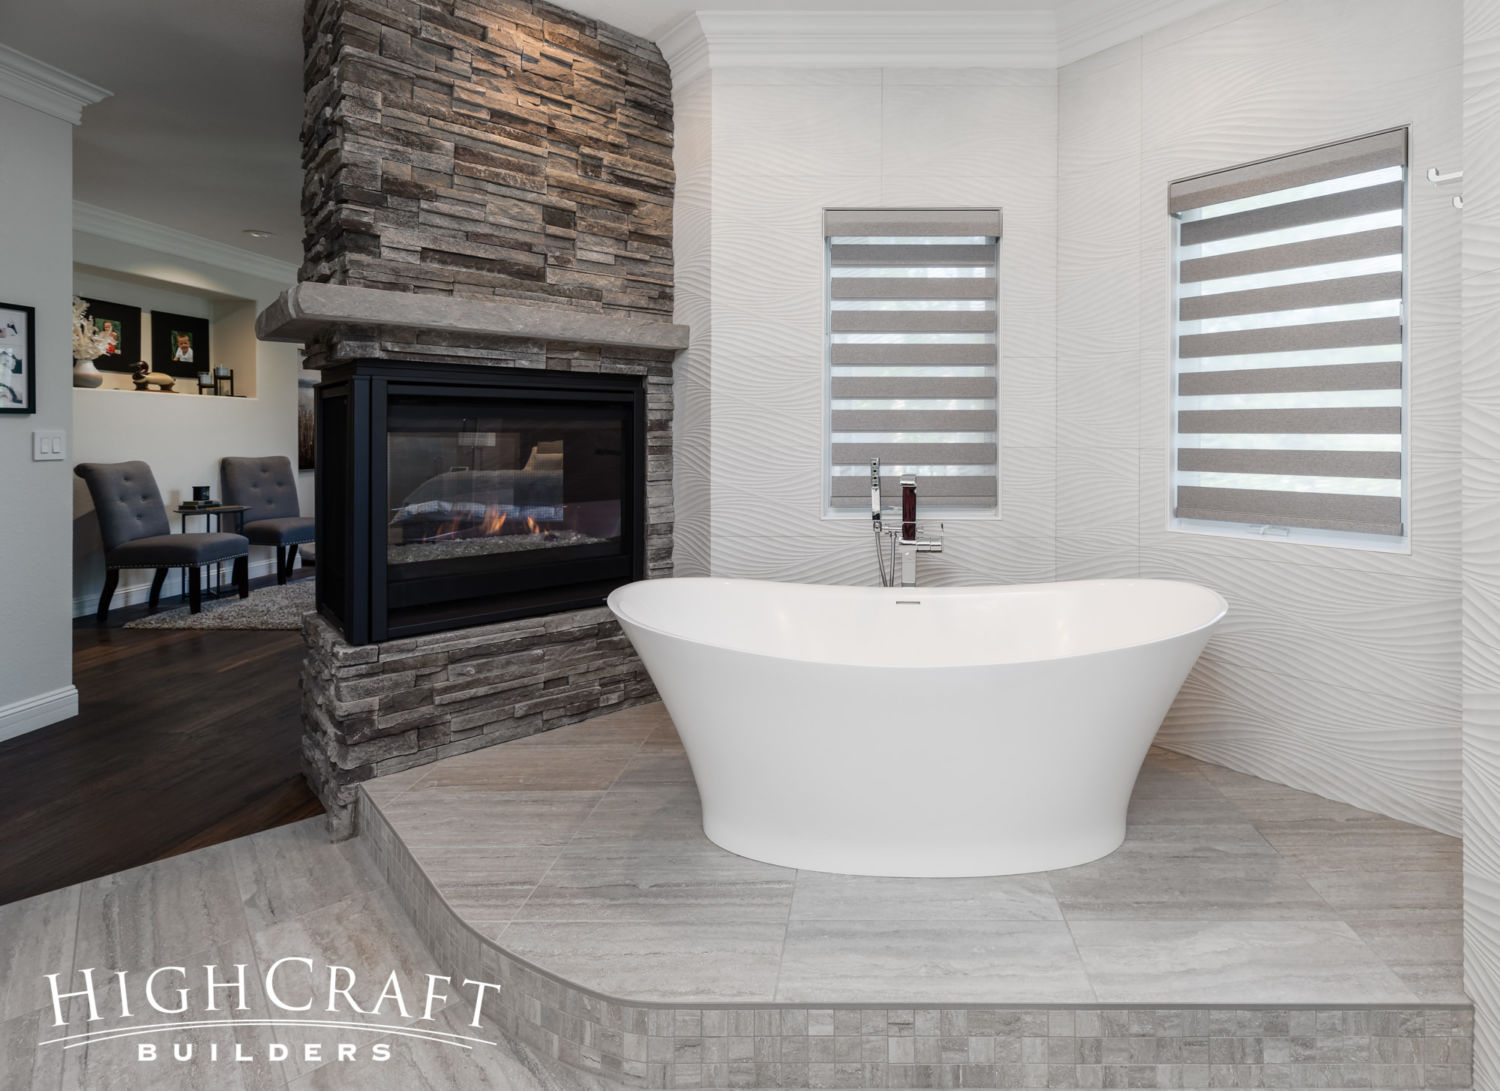 https://www.highcraft.net/wp-content/uploads/2021/06/bathroom-remodeling-fort-collins-co-stand-alone-white-tub-fireplace.jpg